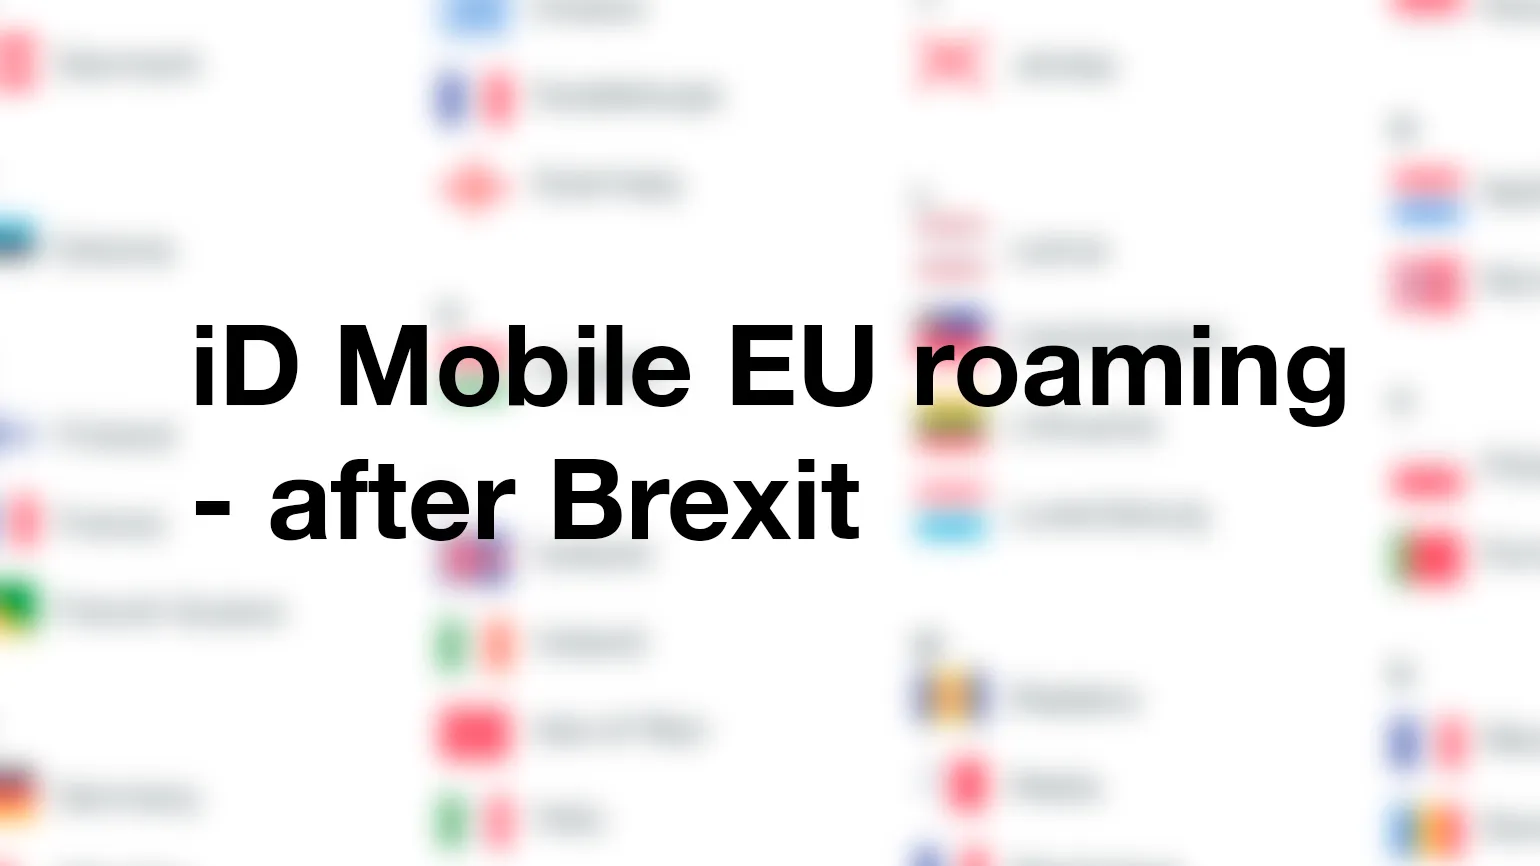 iD Mobile EU roaming - after Brexit